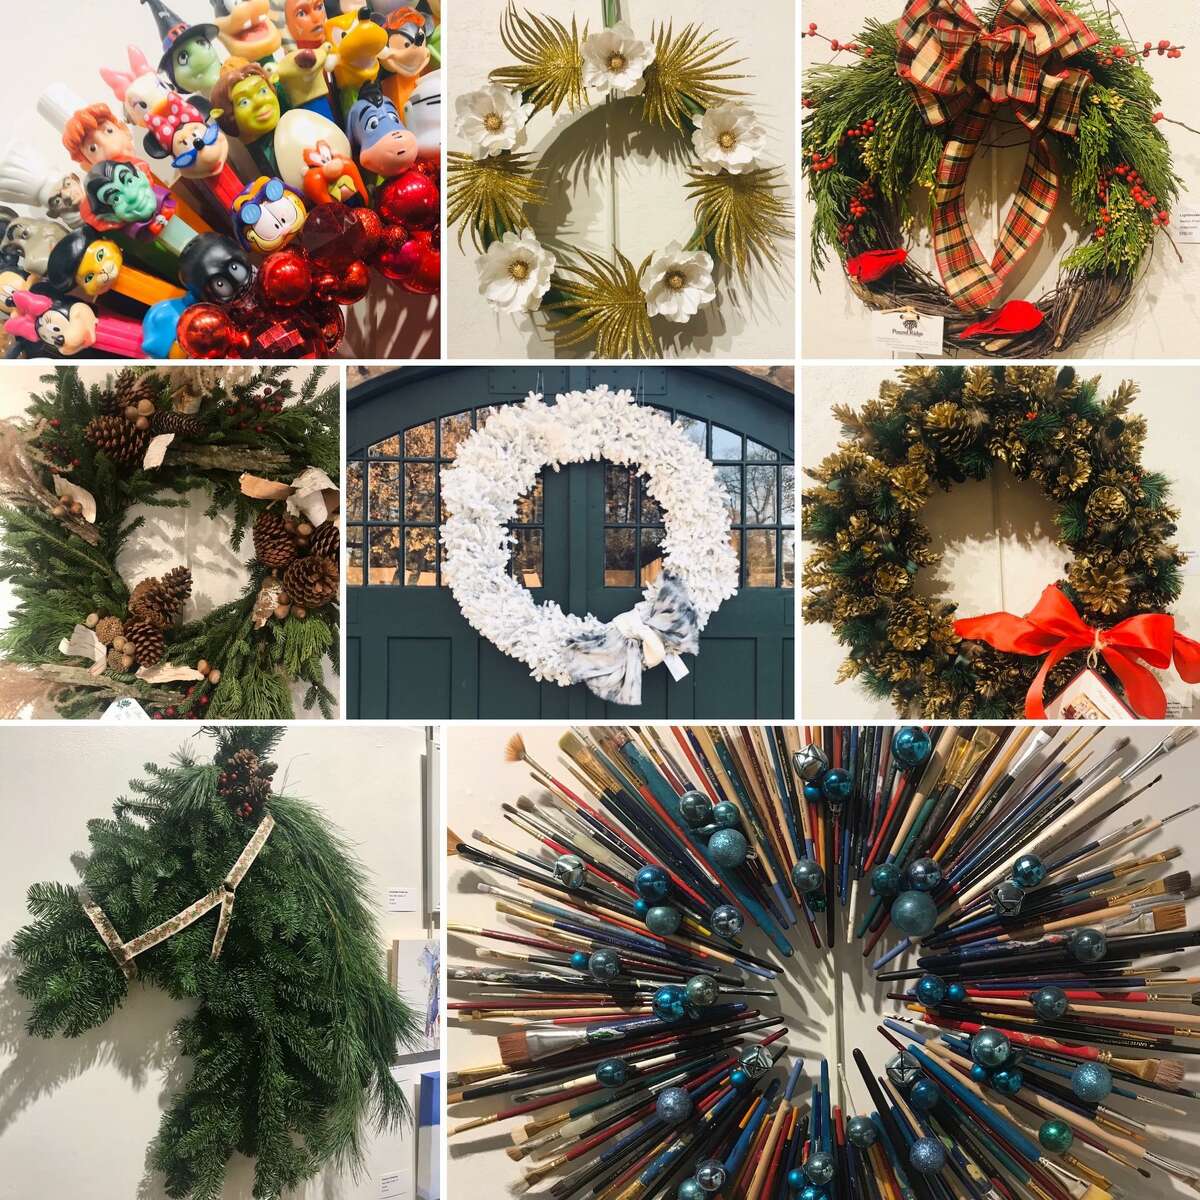 The Carriage Barn Art Center’s 5th annual wreath auction and small works exhibit, Deck The Walls, opens Nov. 29, the first Sunday after Thanksgiving. The exhibit is opening on the same day as the Carriage Barn’s Artist Sunday event.